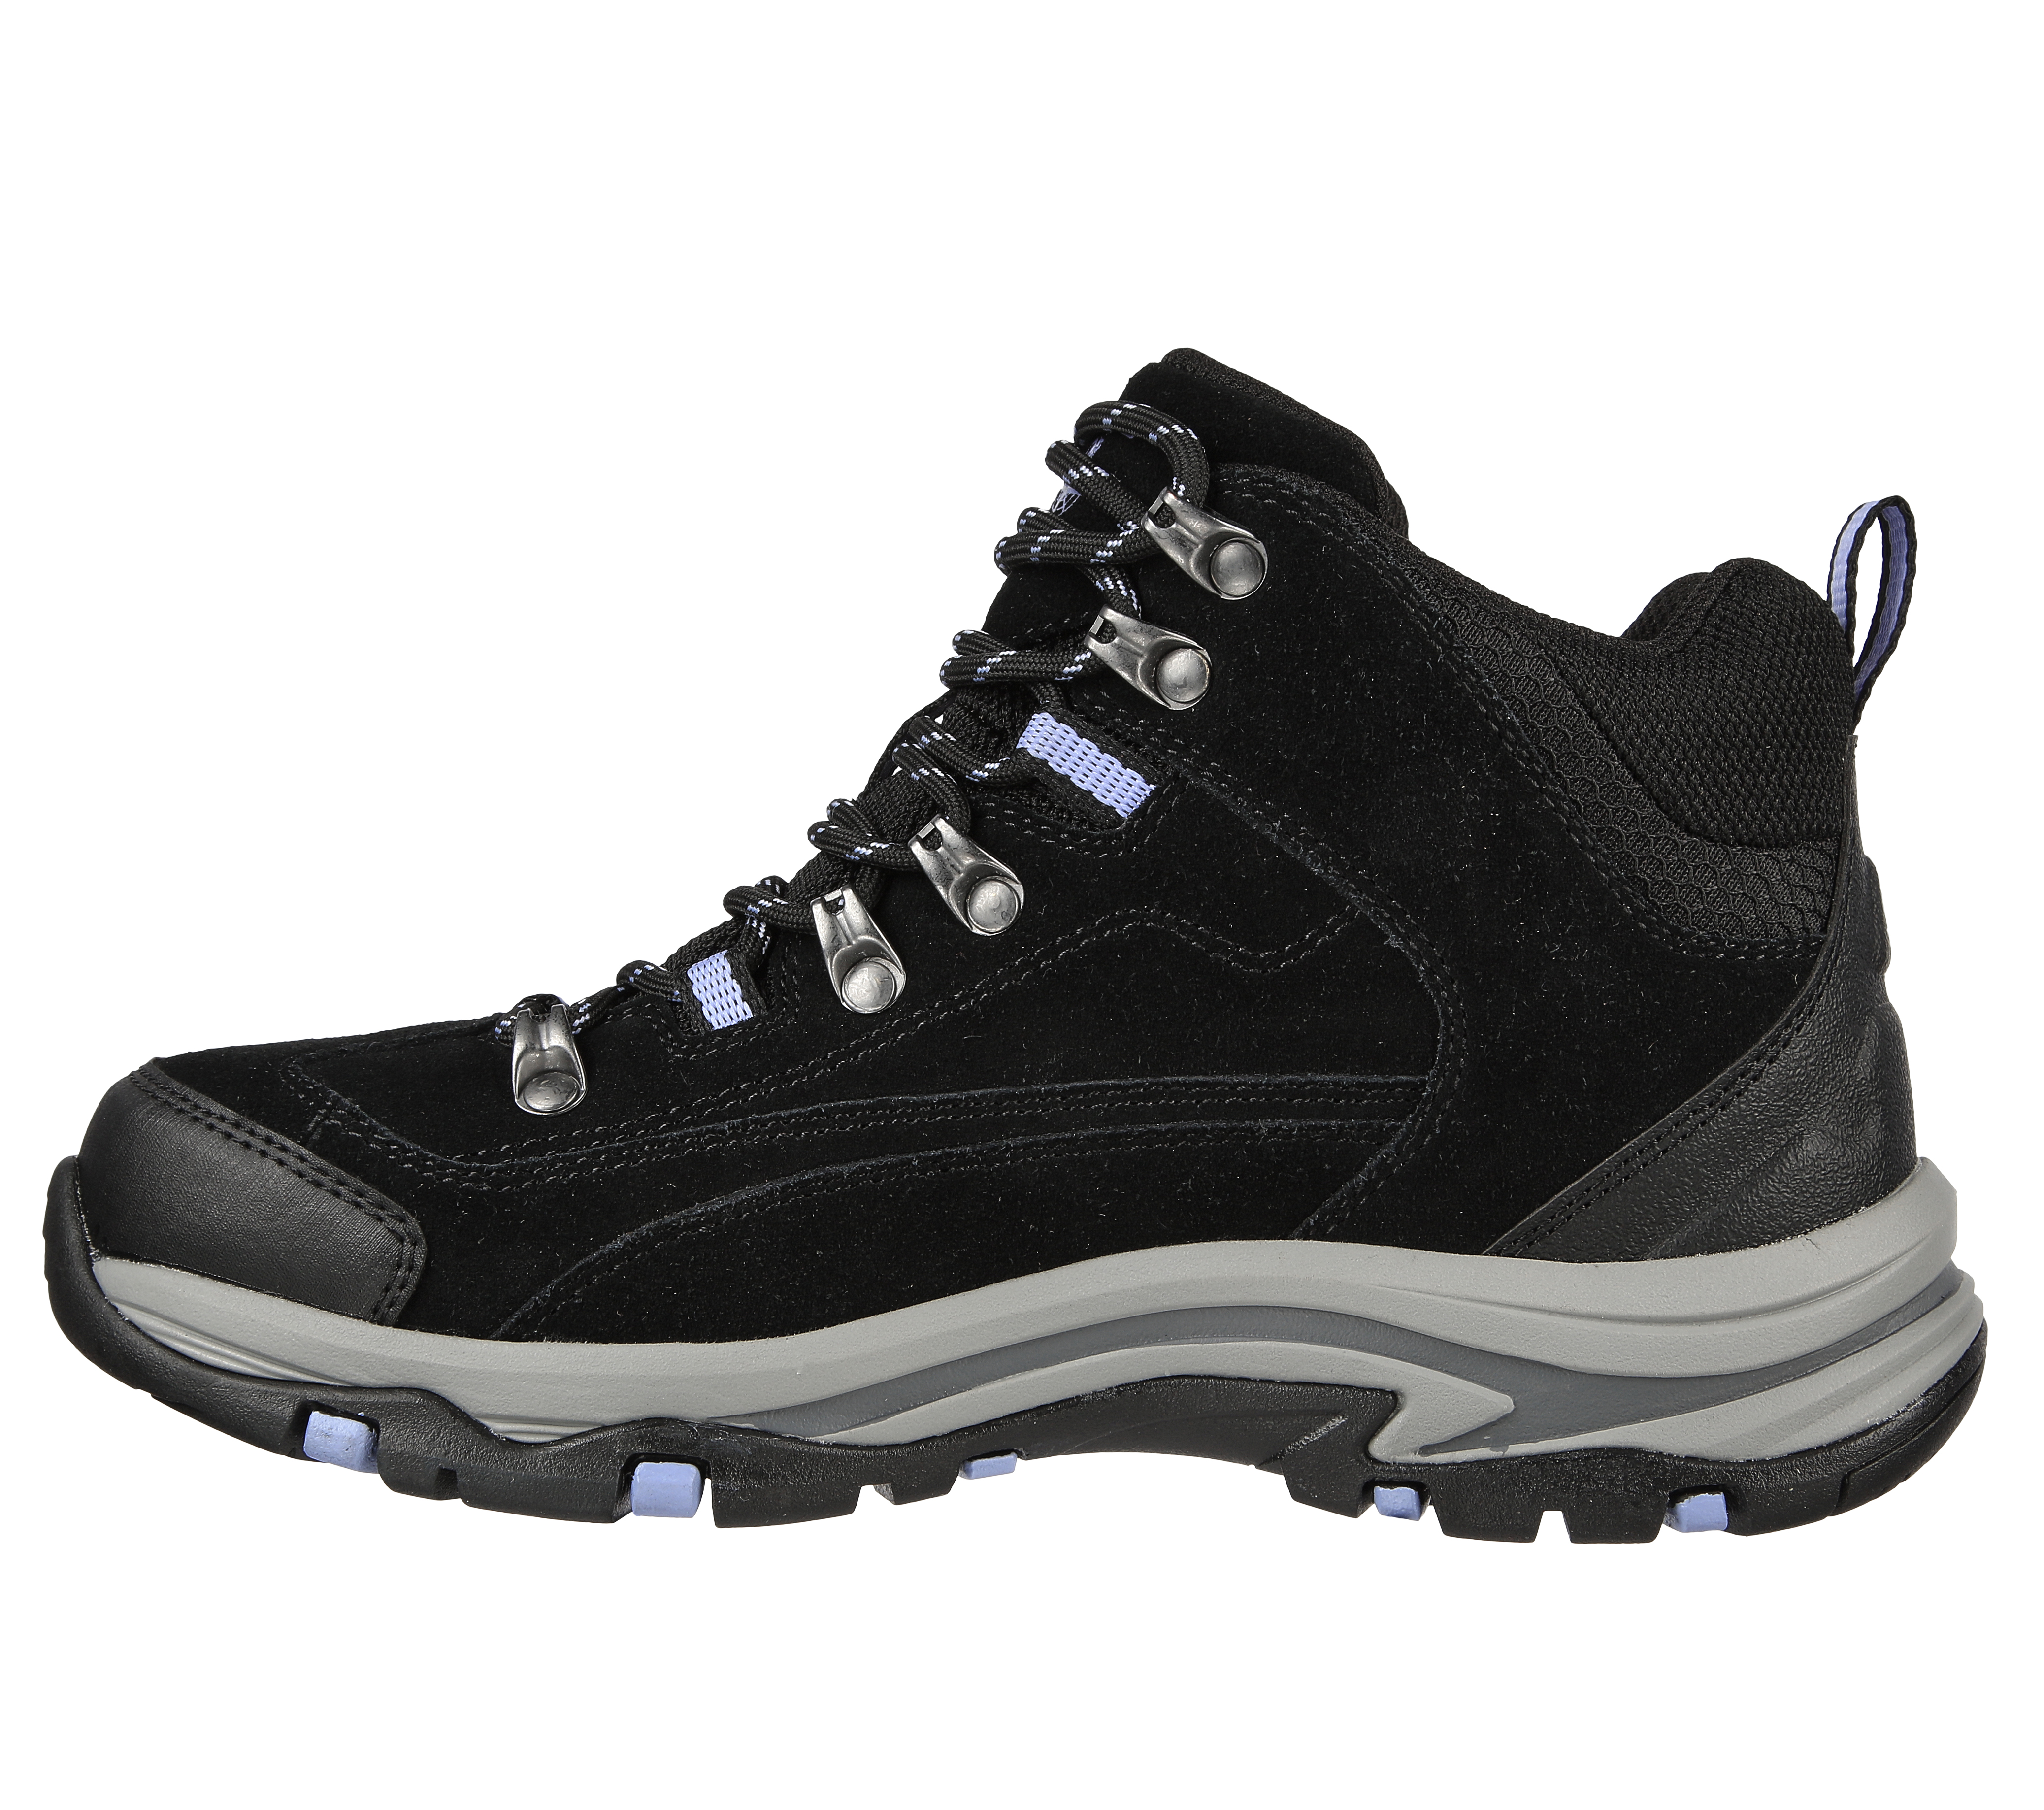 skechers outdoor lifestyle boots